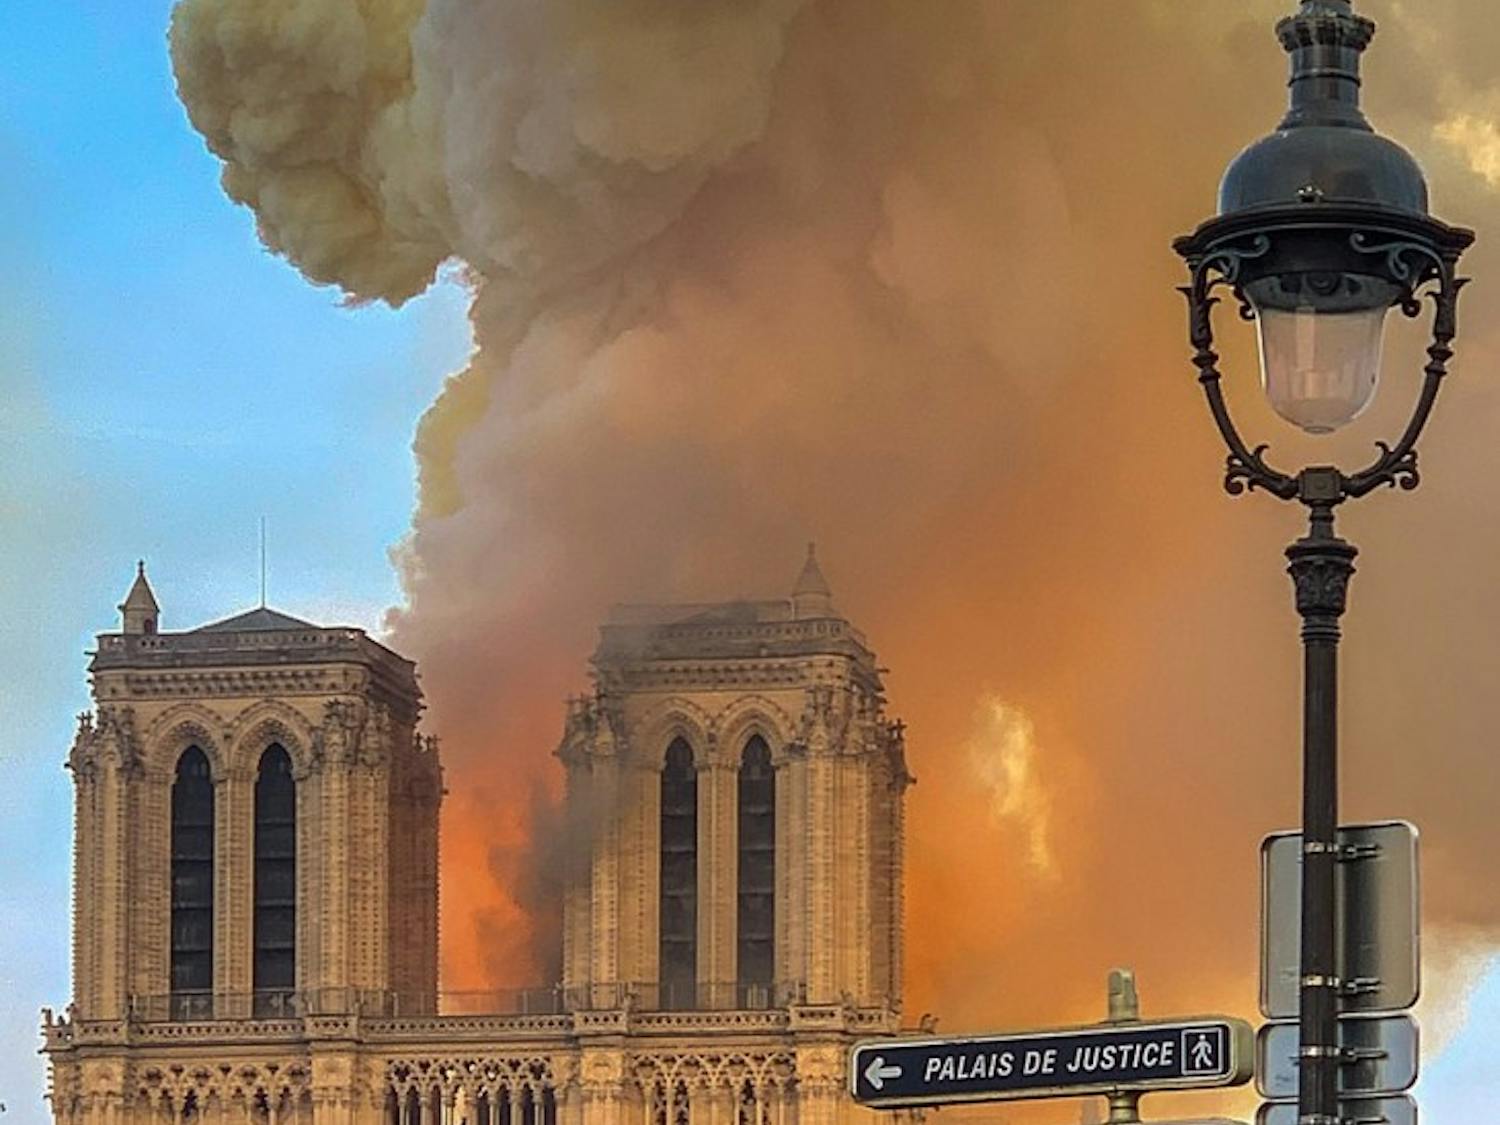 The Notre Dame Cathedral caught fire Monday night. The fire destroyed the roof and middle spire.